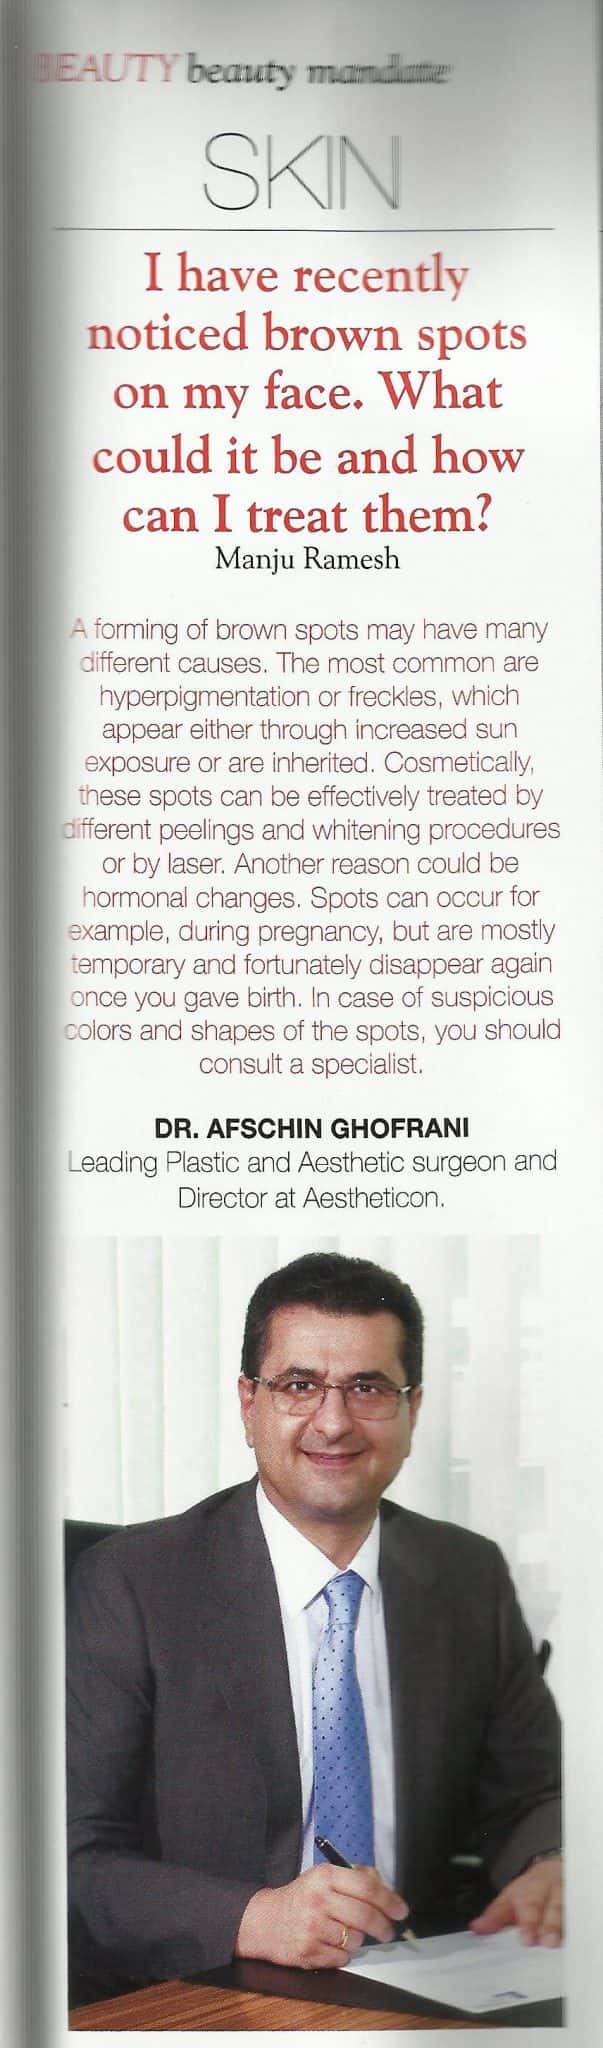 dr-ghofrani-featured-in-famina.jpg